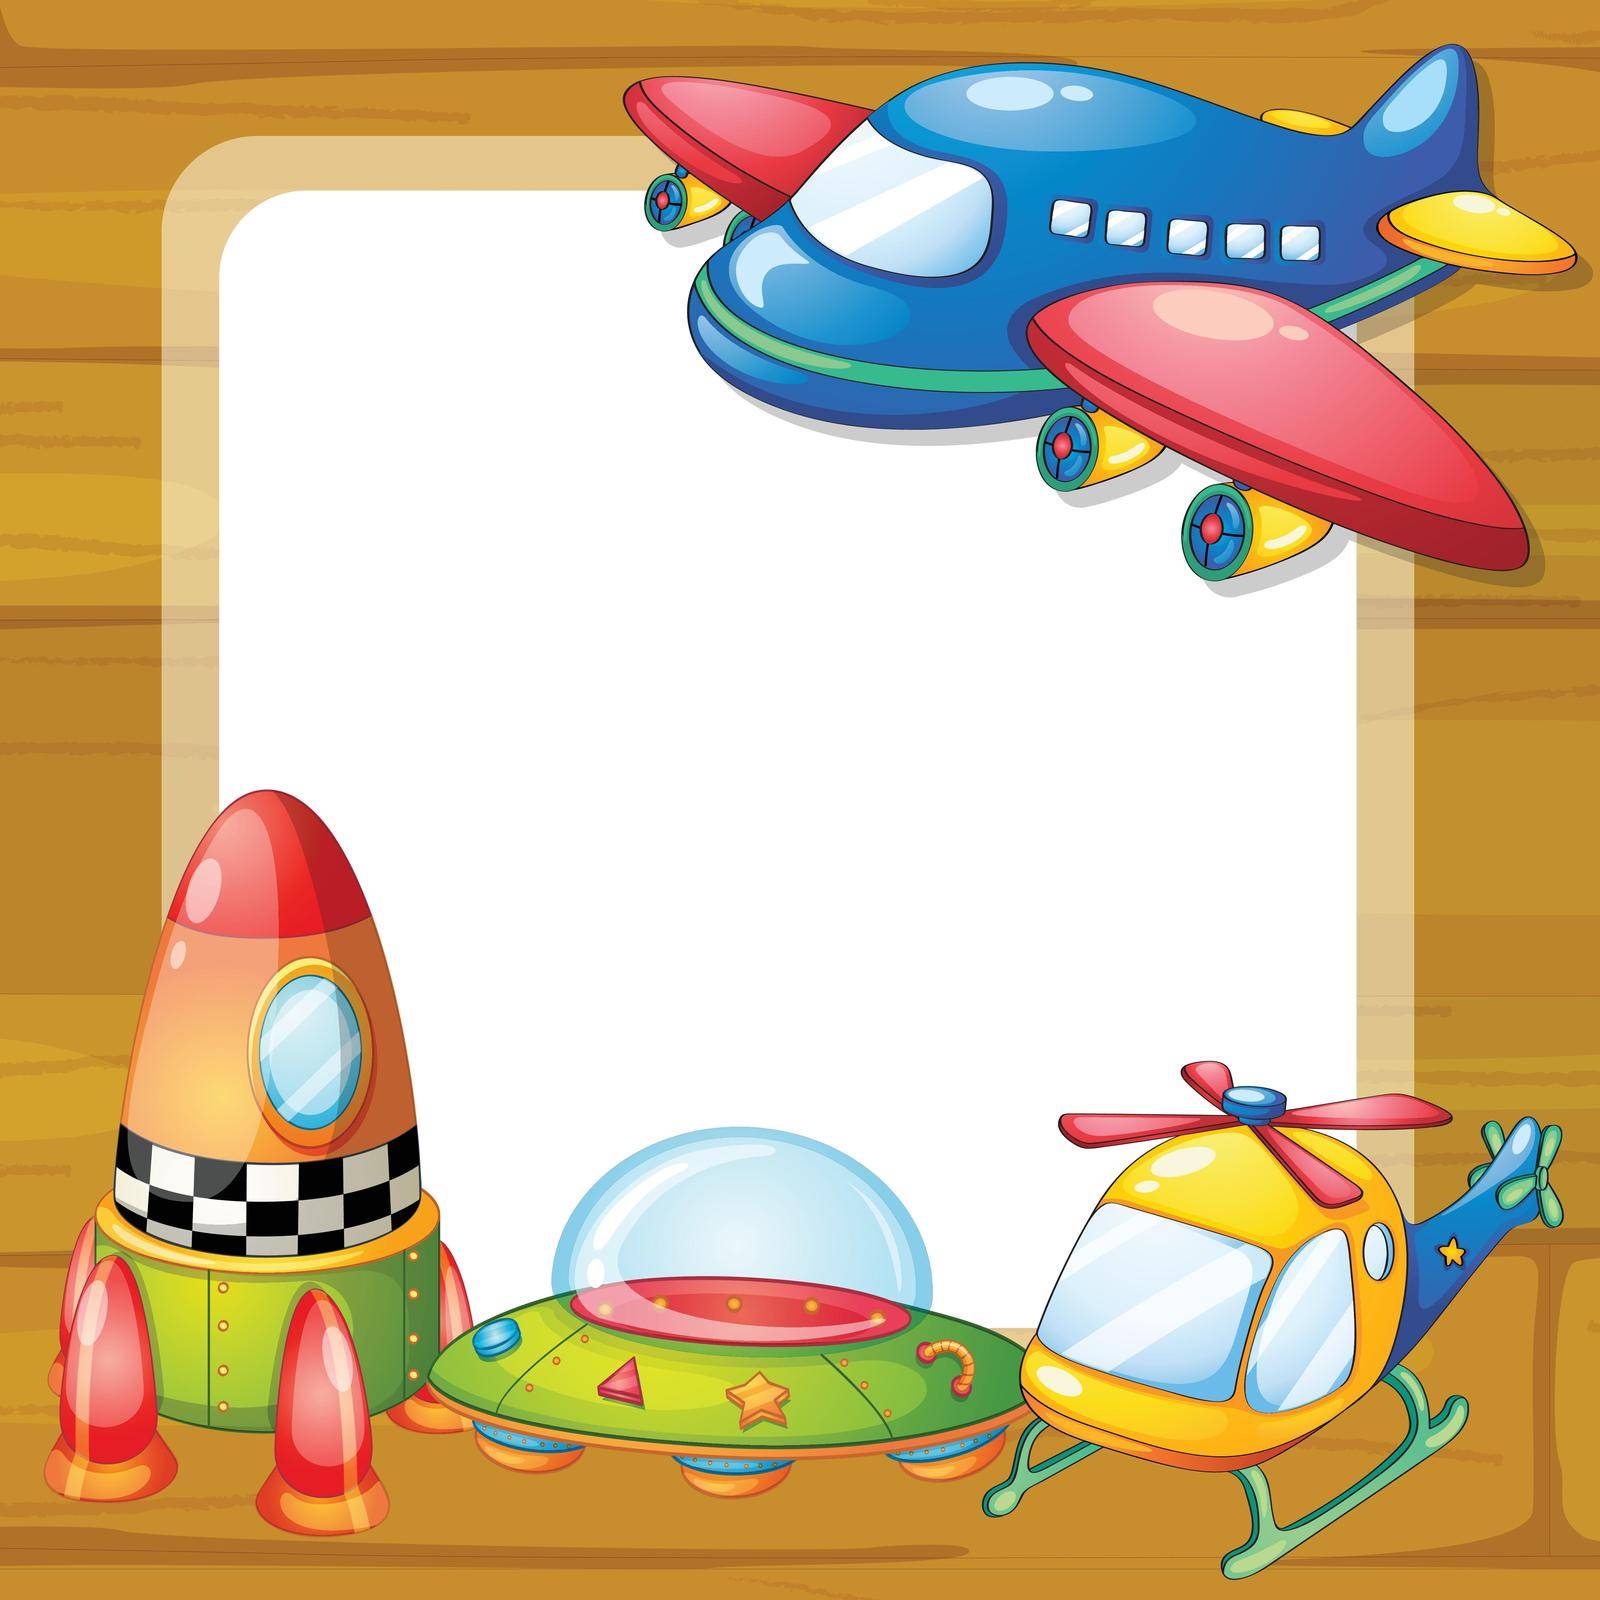 illustration of toys and a board on a white backgound